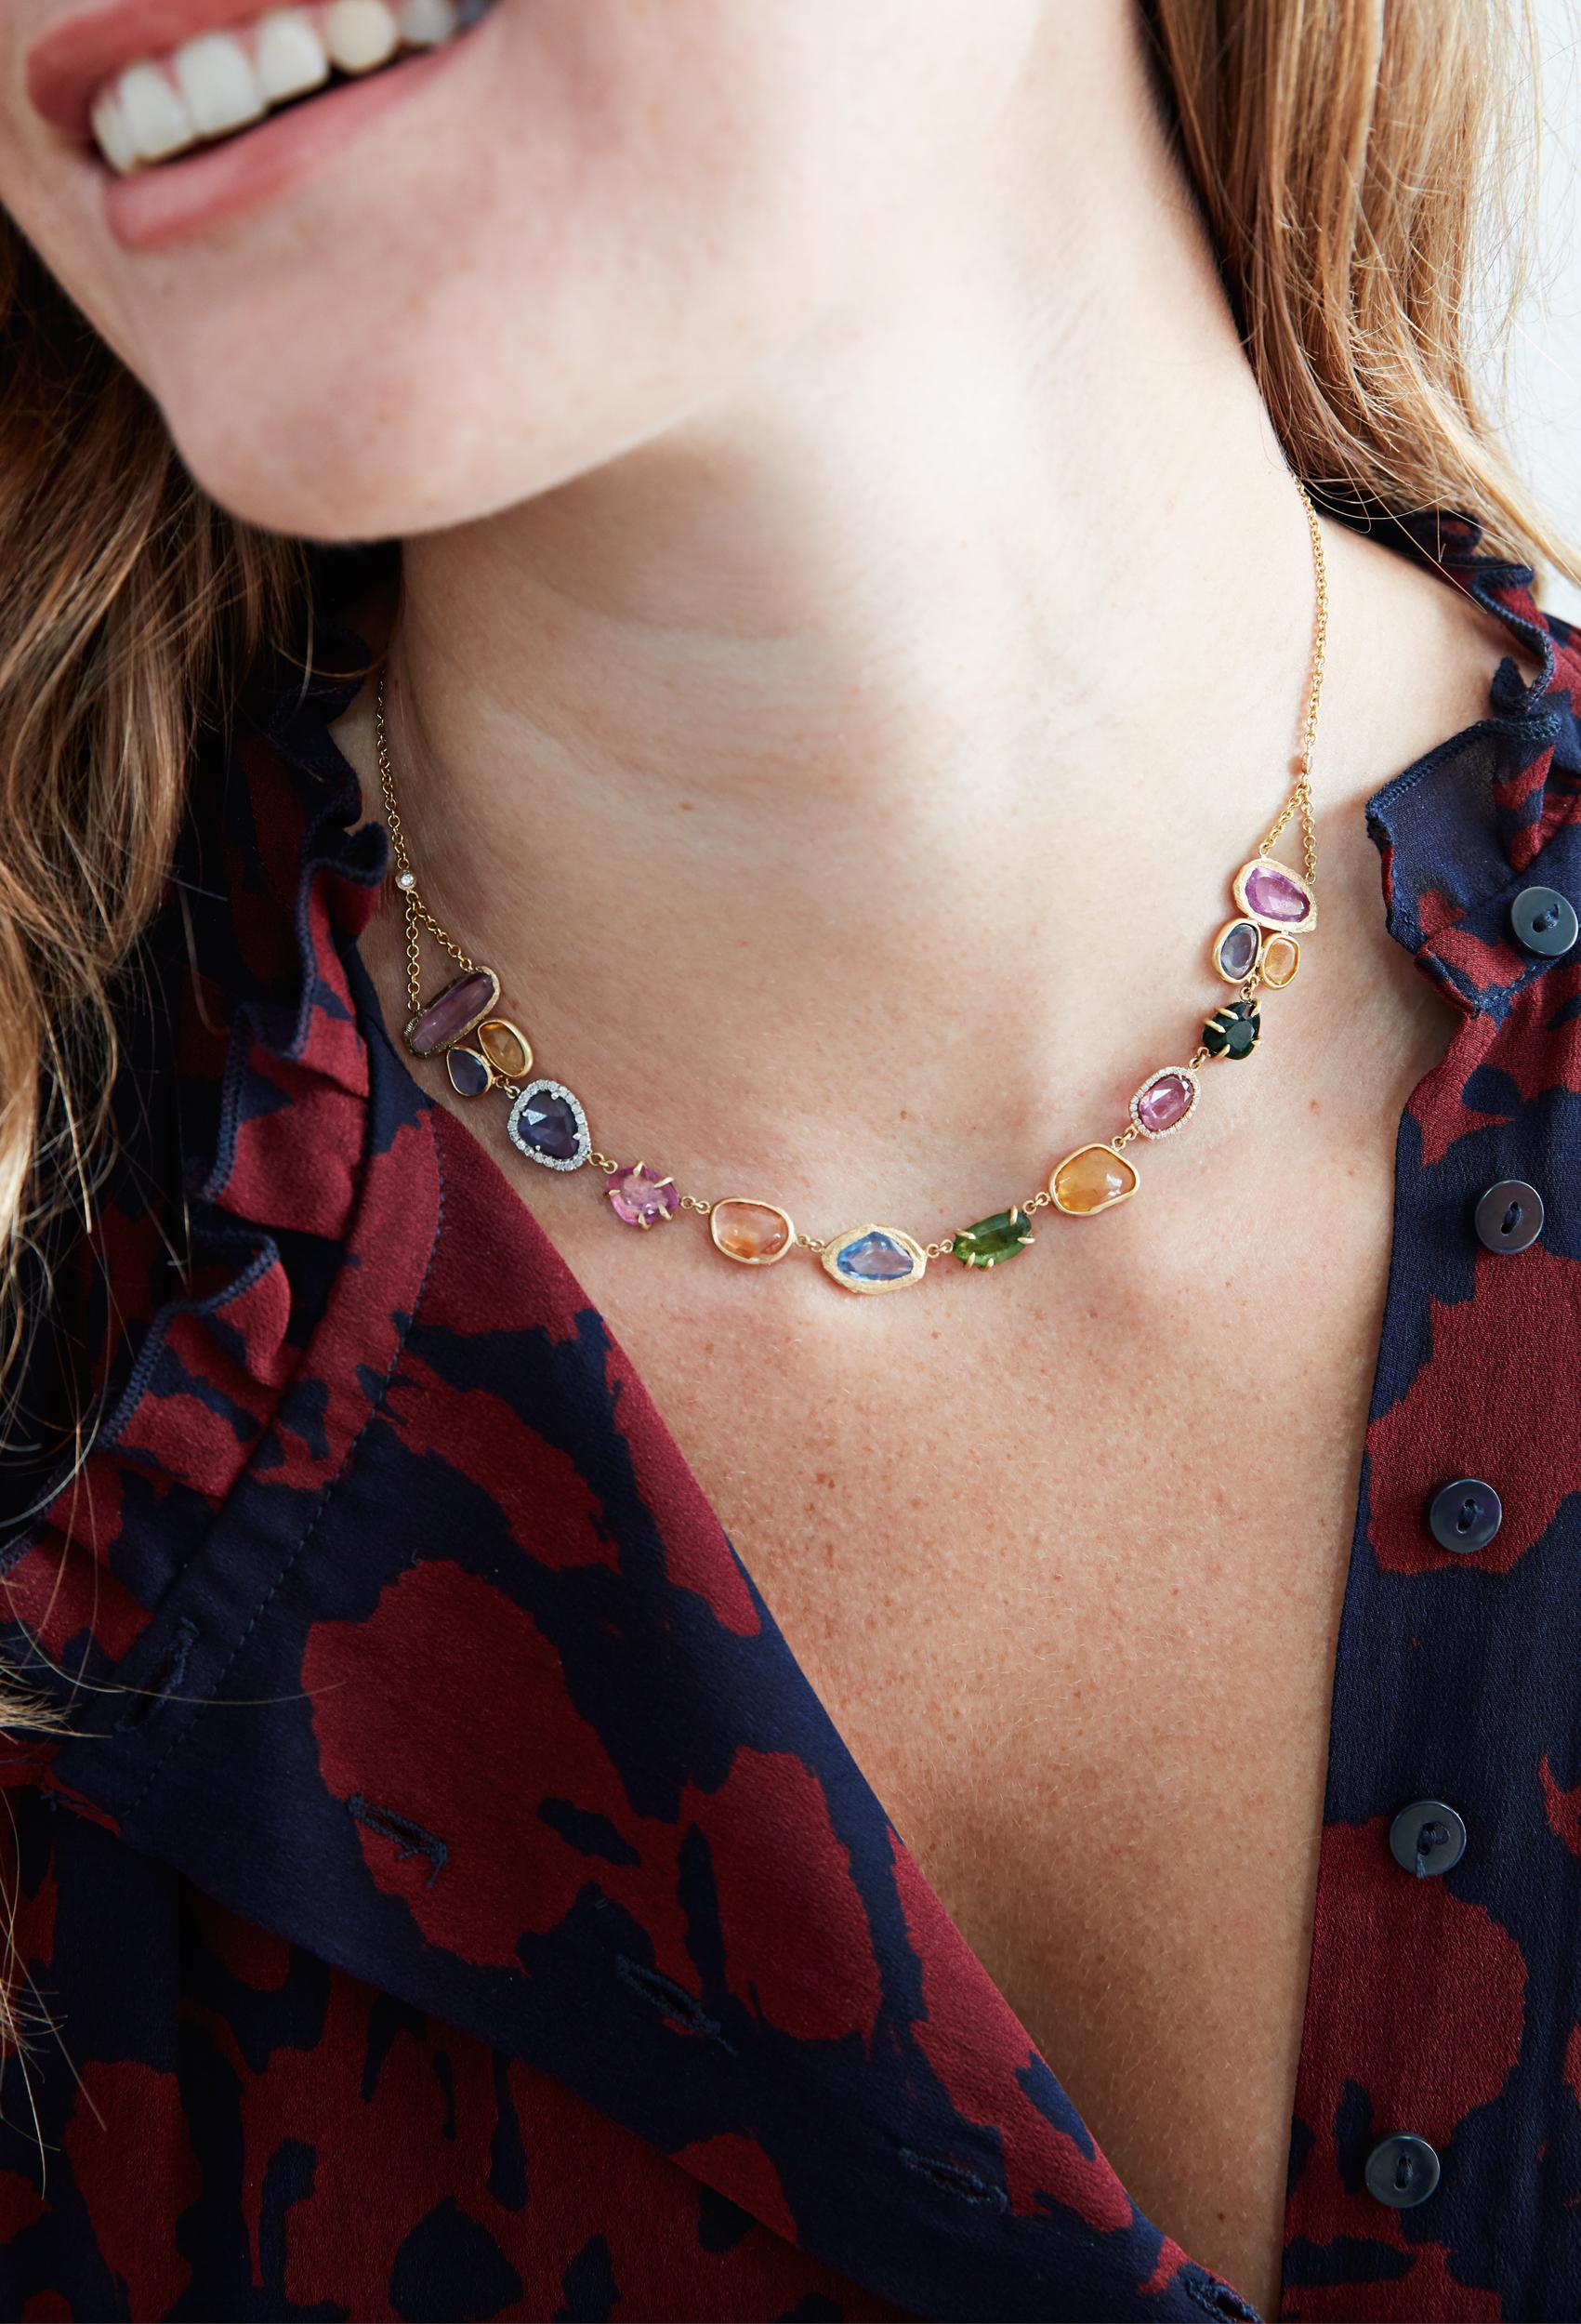 Handcarved 18KT Gold necklace with multi-colored sapphires including diamonds, tsavorite garnets, blue sapphires, orange sapphires, and pink sapphires.  One-of-a-kind necklace with over 20 total carats weight.  It is a stunning sapphire necklace